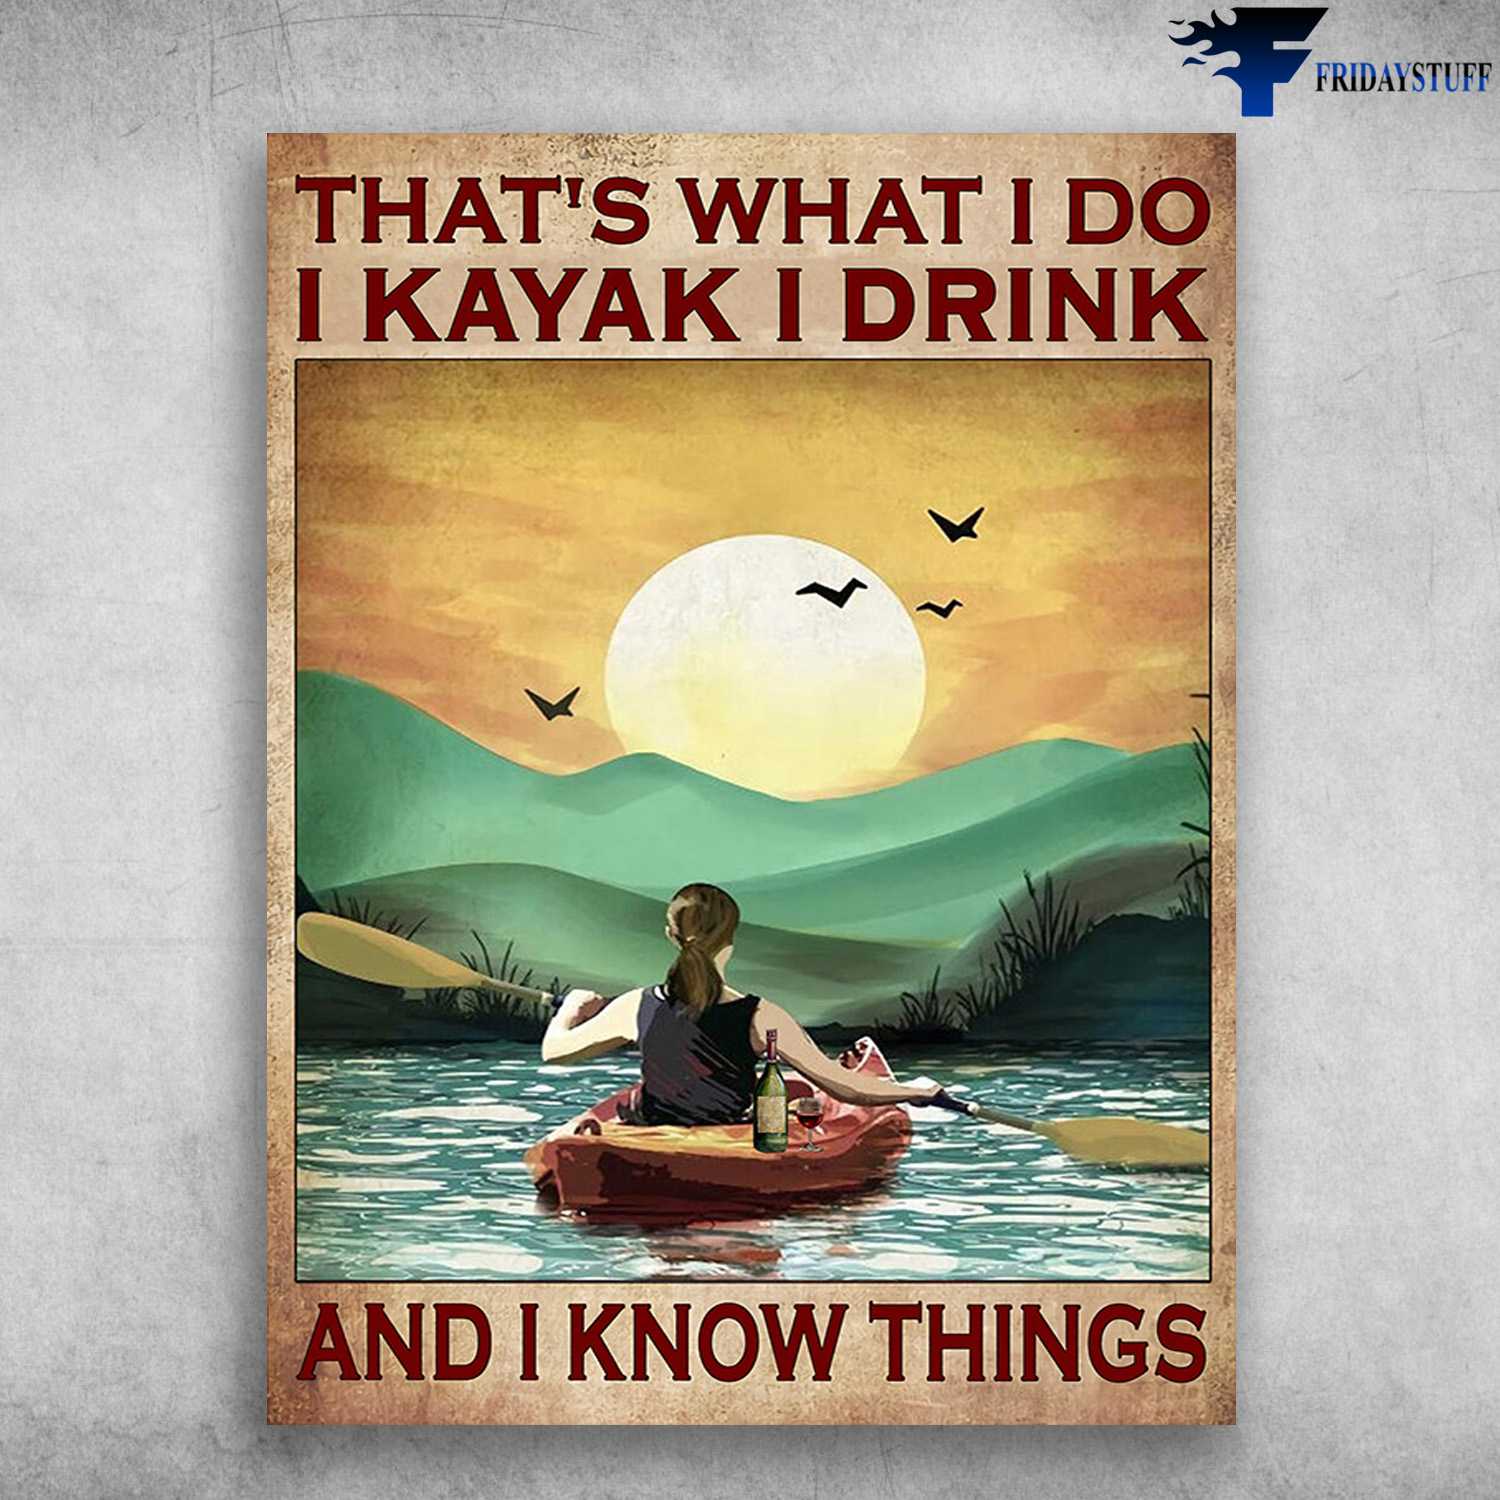 Kayaking Girl, Kayaking With Wine - That What I Do, I Kayak, I Drink, And I Know Things